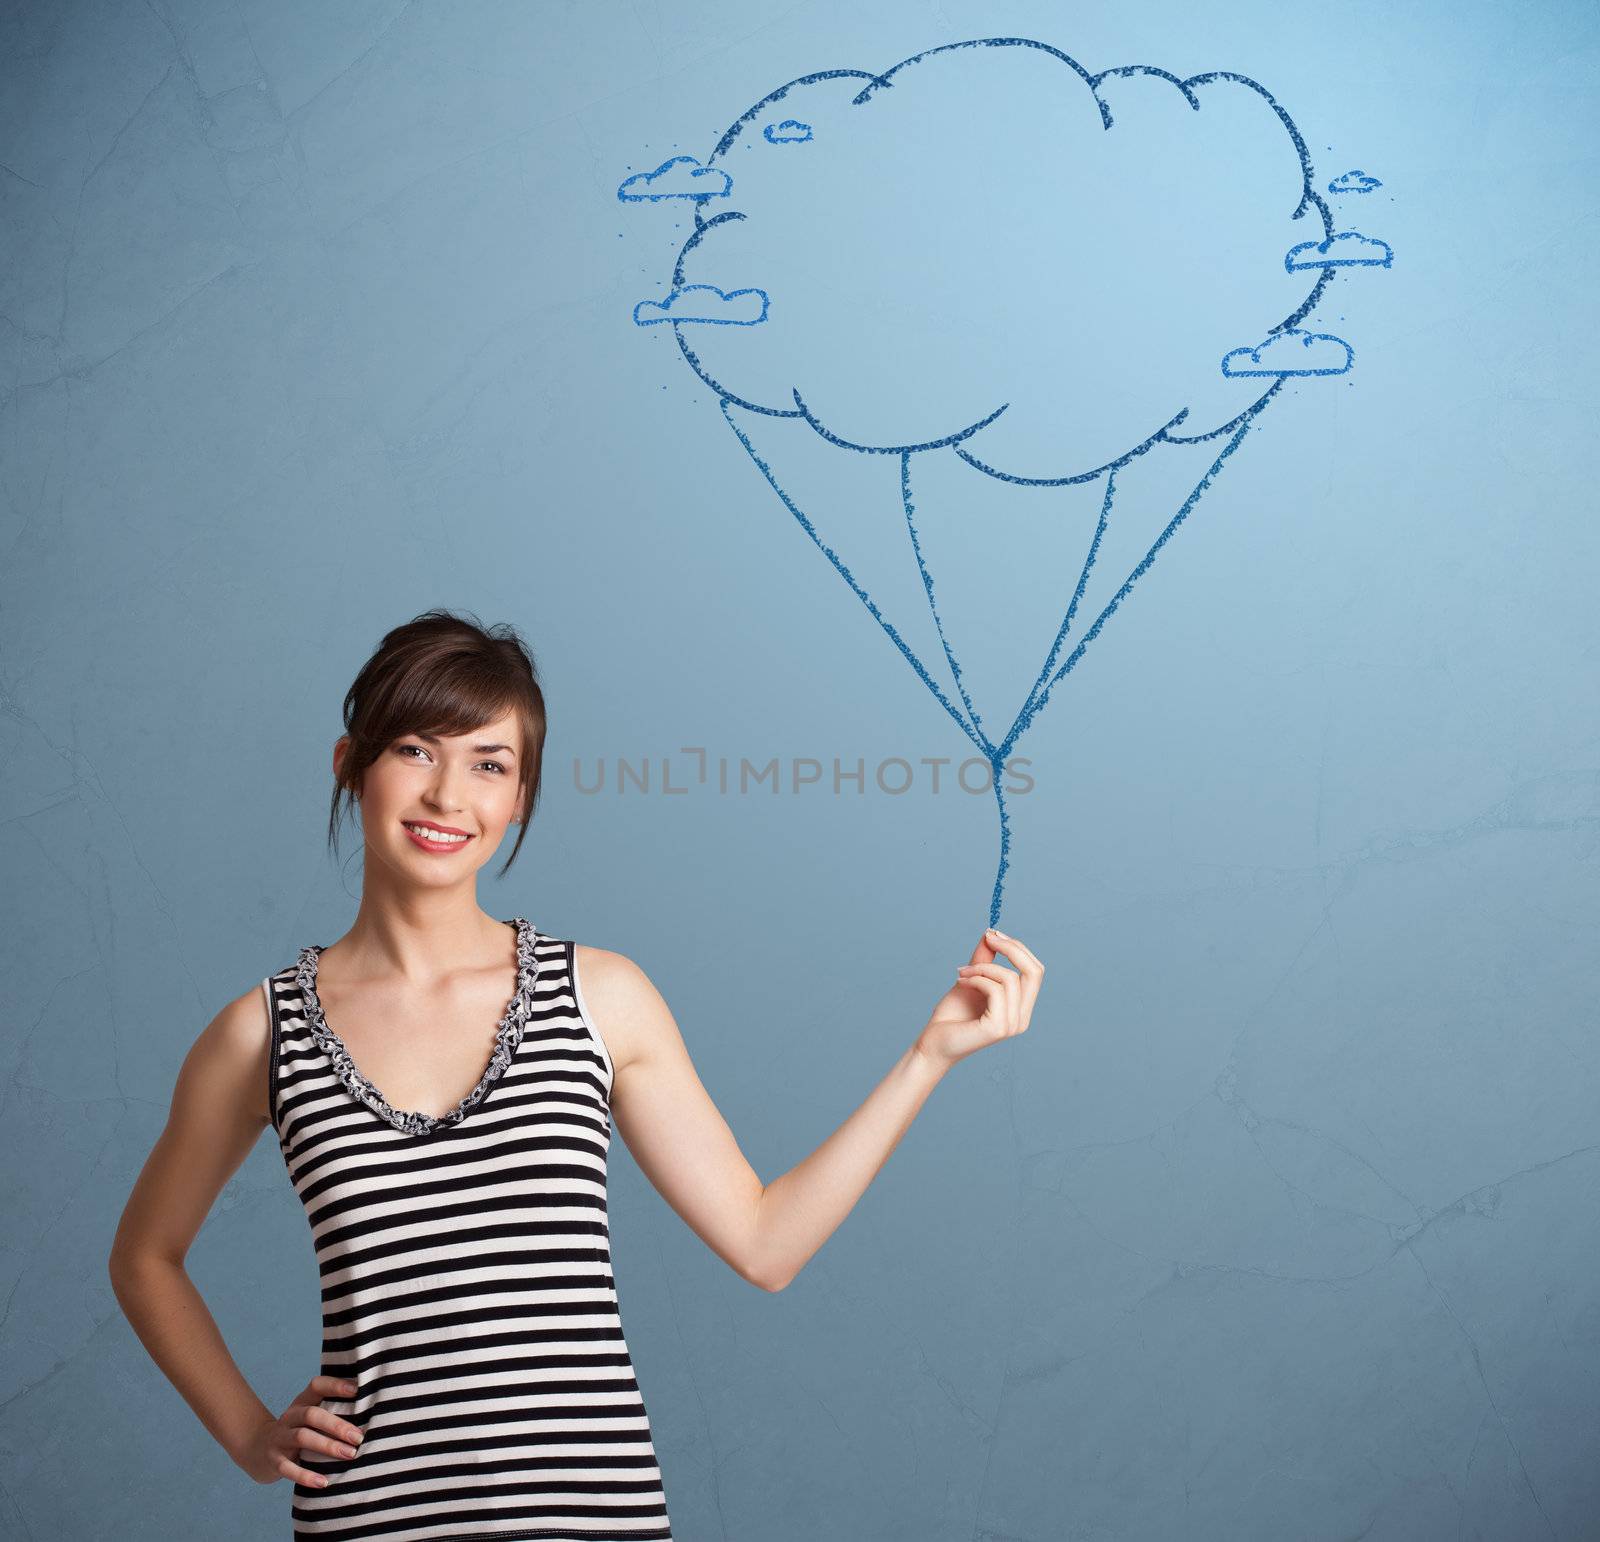 Pretty lady holding a cloud balloon drawing by ra2studio